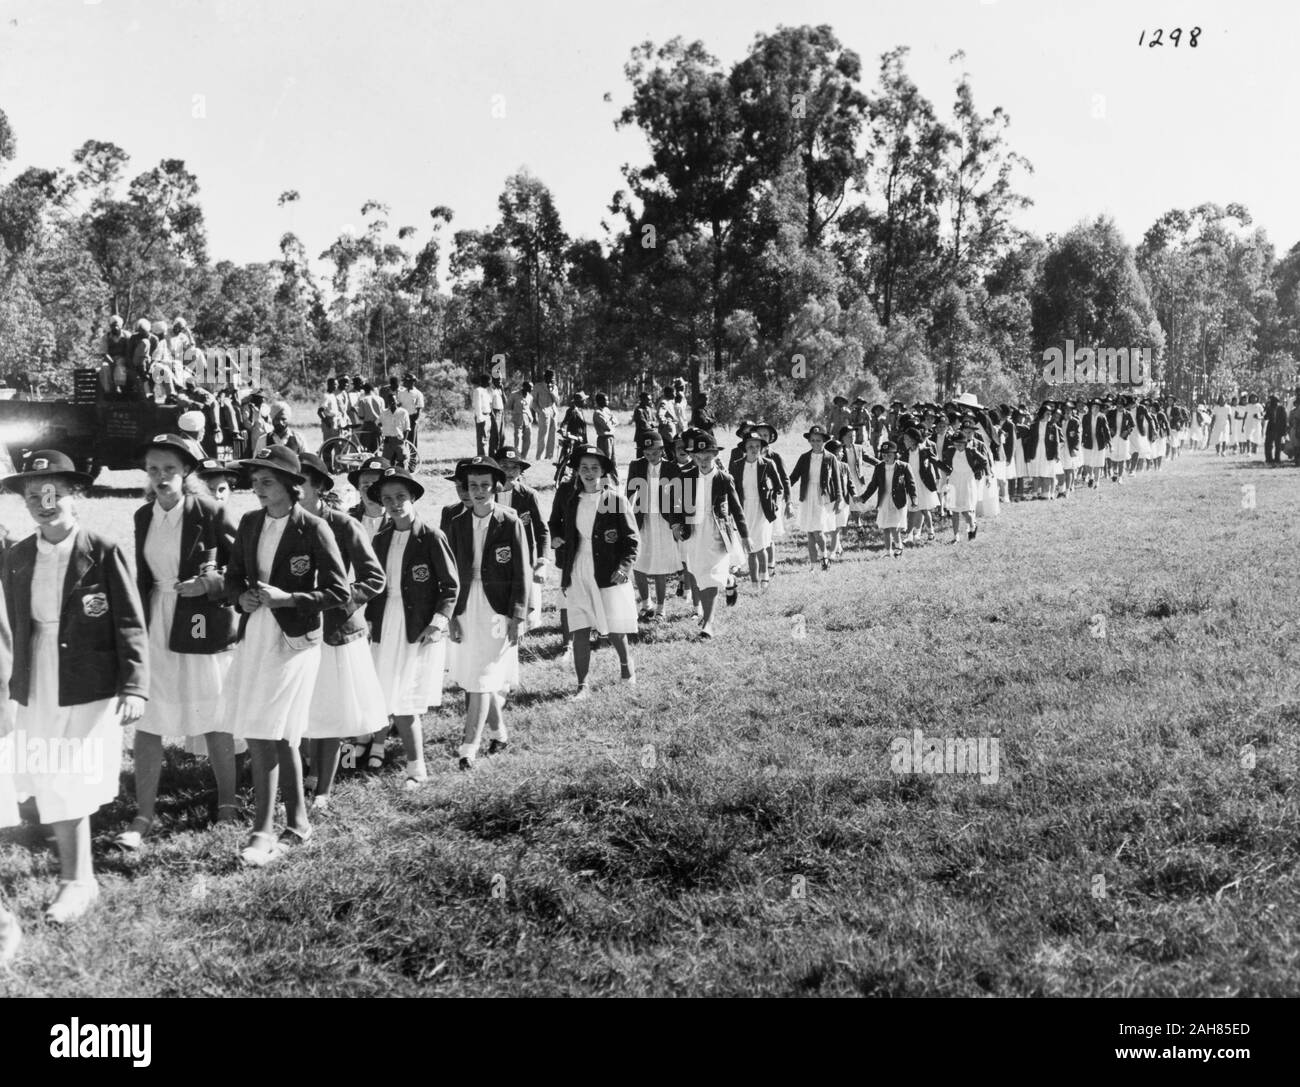 Kenya, A large line of European school girls walk through a field with trees in the background. The girls all wear white dresses with dark blazers and round hats. On the left flank of the line march a small group of African school girls wearing white dresses. In the background of the picture are a group of onlookers; some stand and others sit on a truck, February 1952. 2001/090/1/4/1/29. Stock Photo